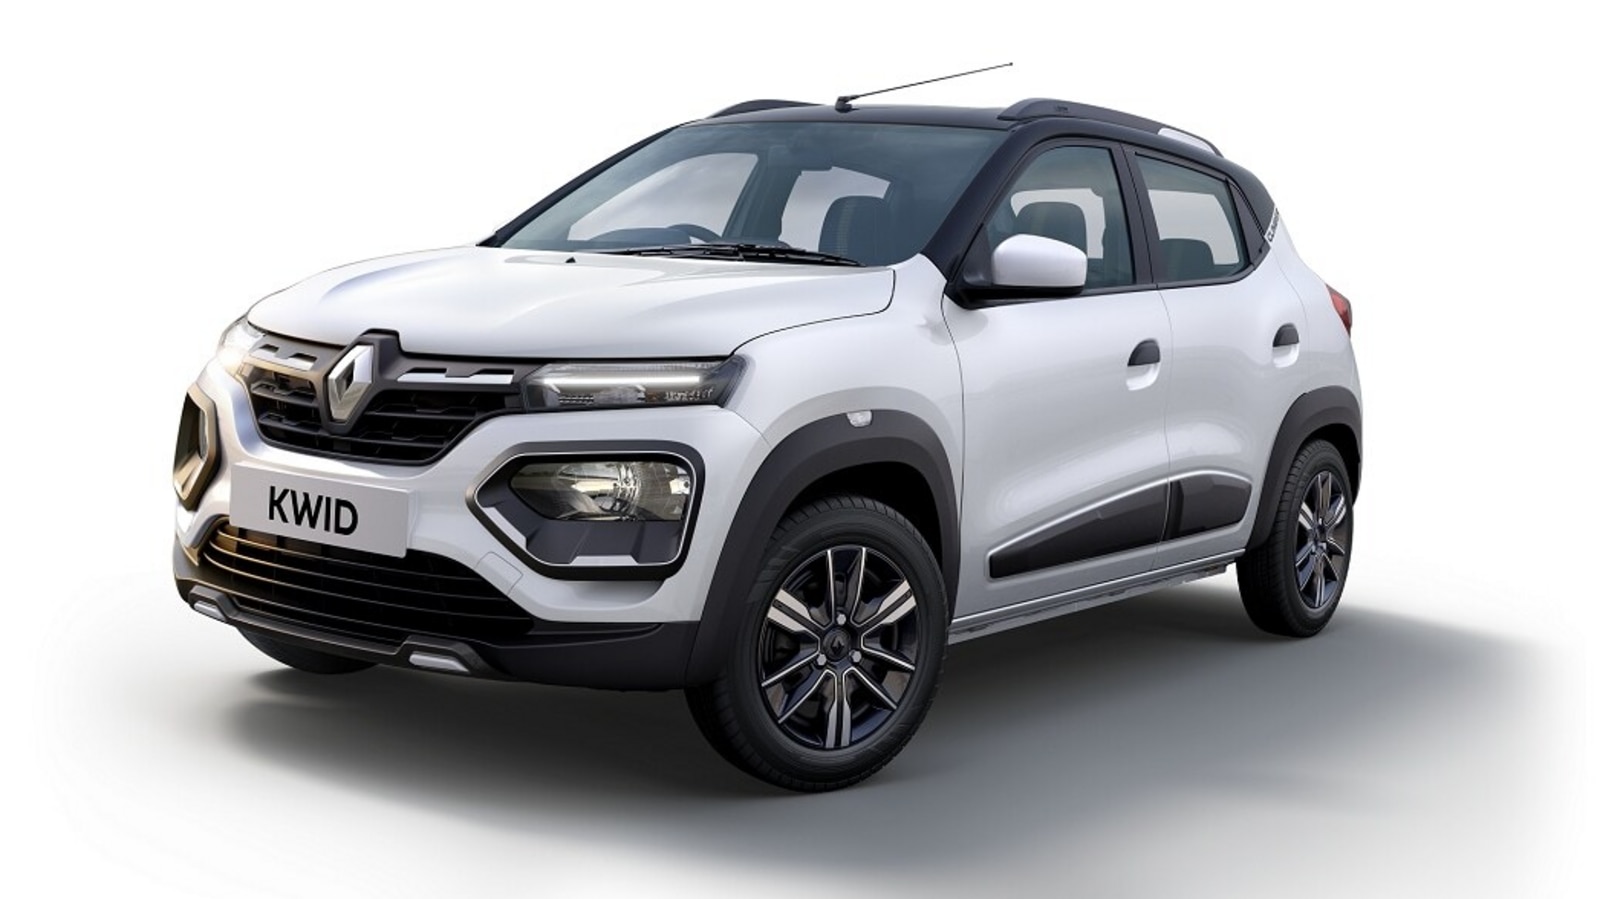 Renault plans to launch Kwid EV in India: Report